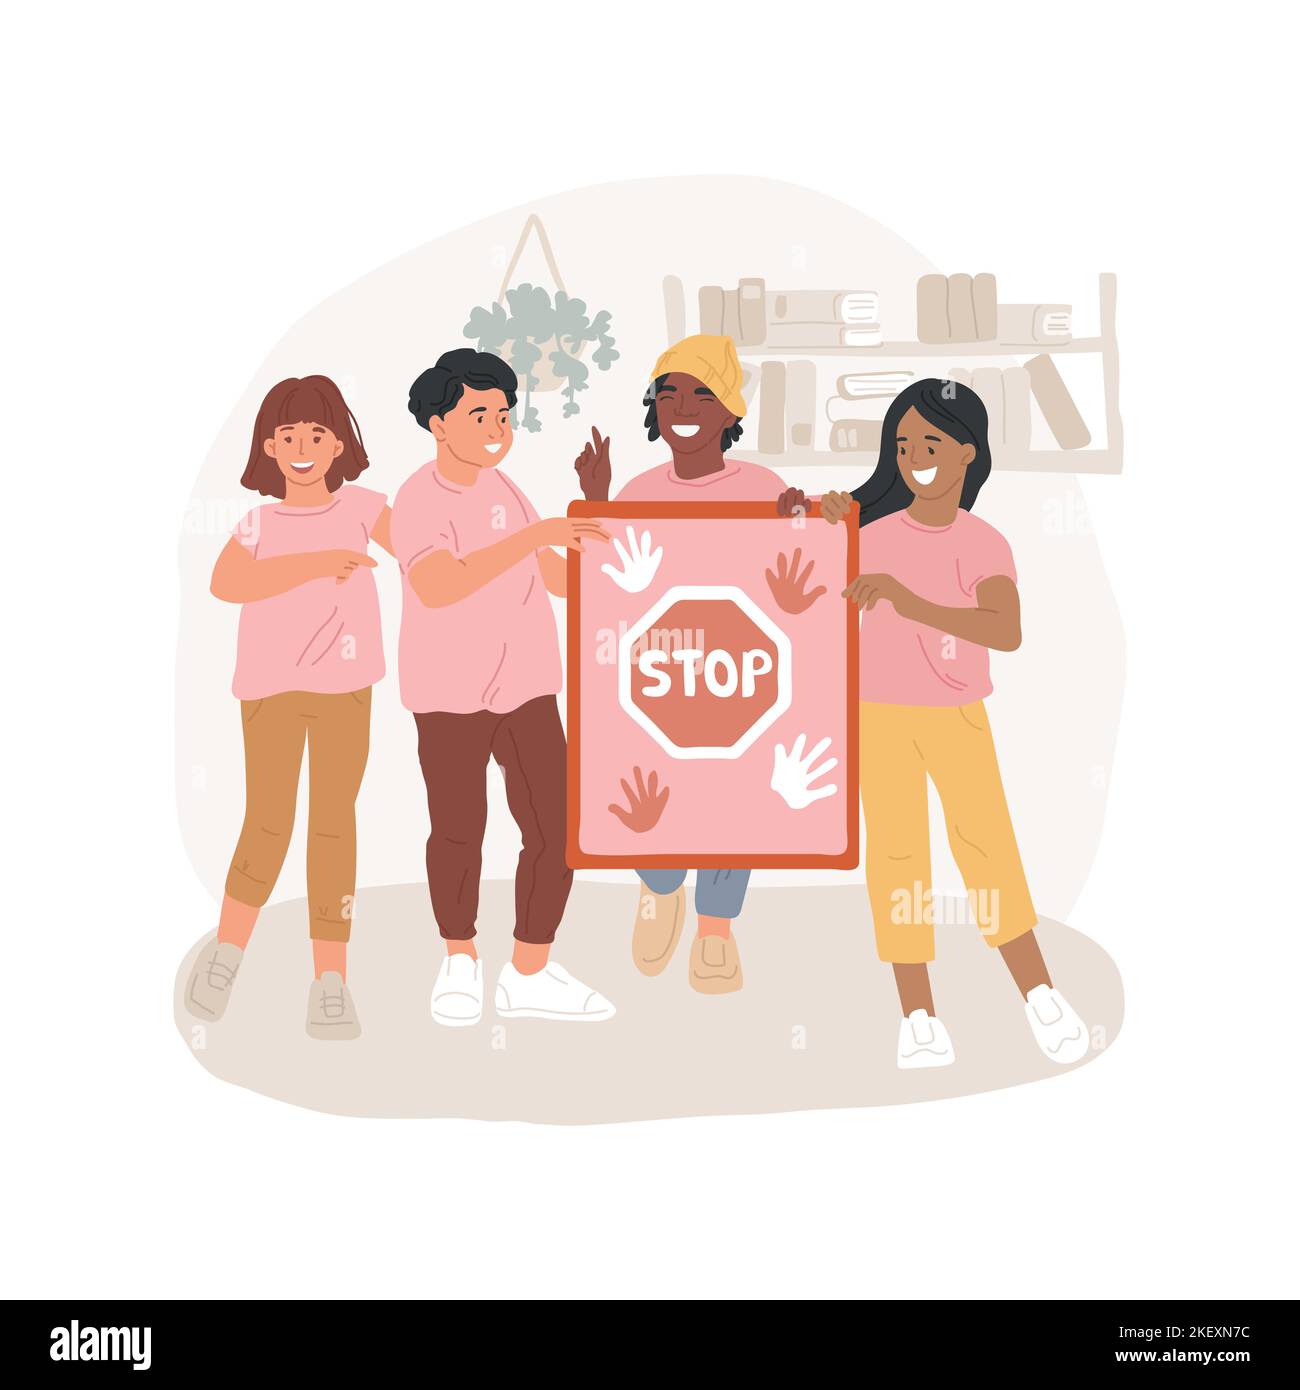 530 Anti Bullying Campaign Images, Stock Photos, 3D objects, & Vectors